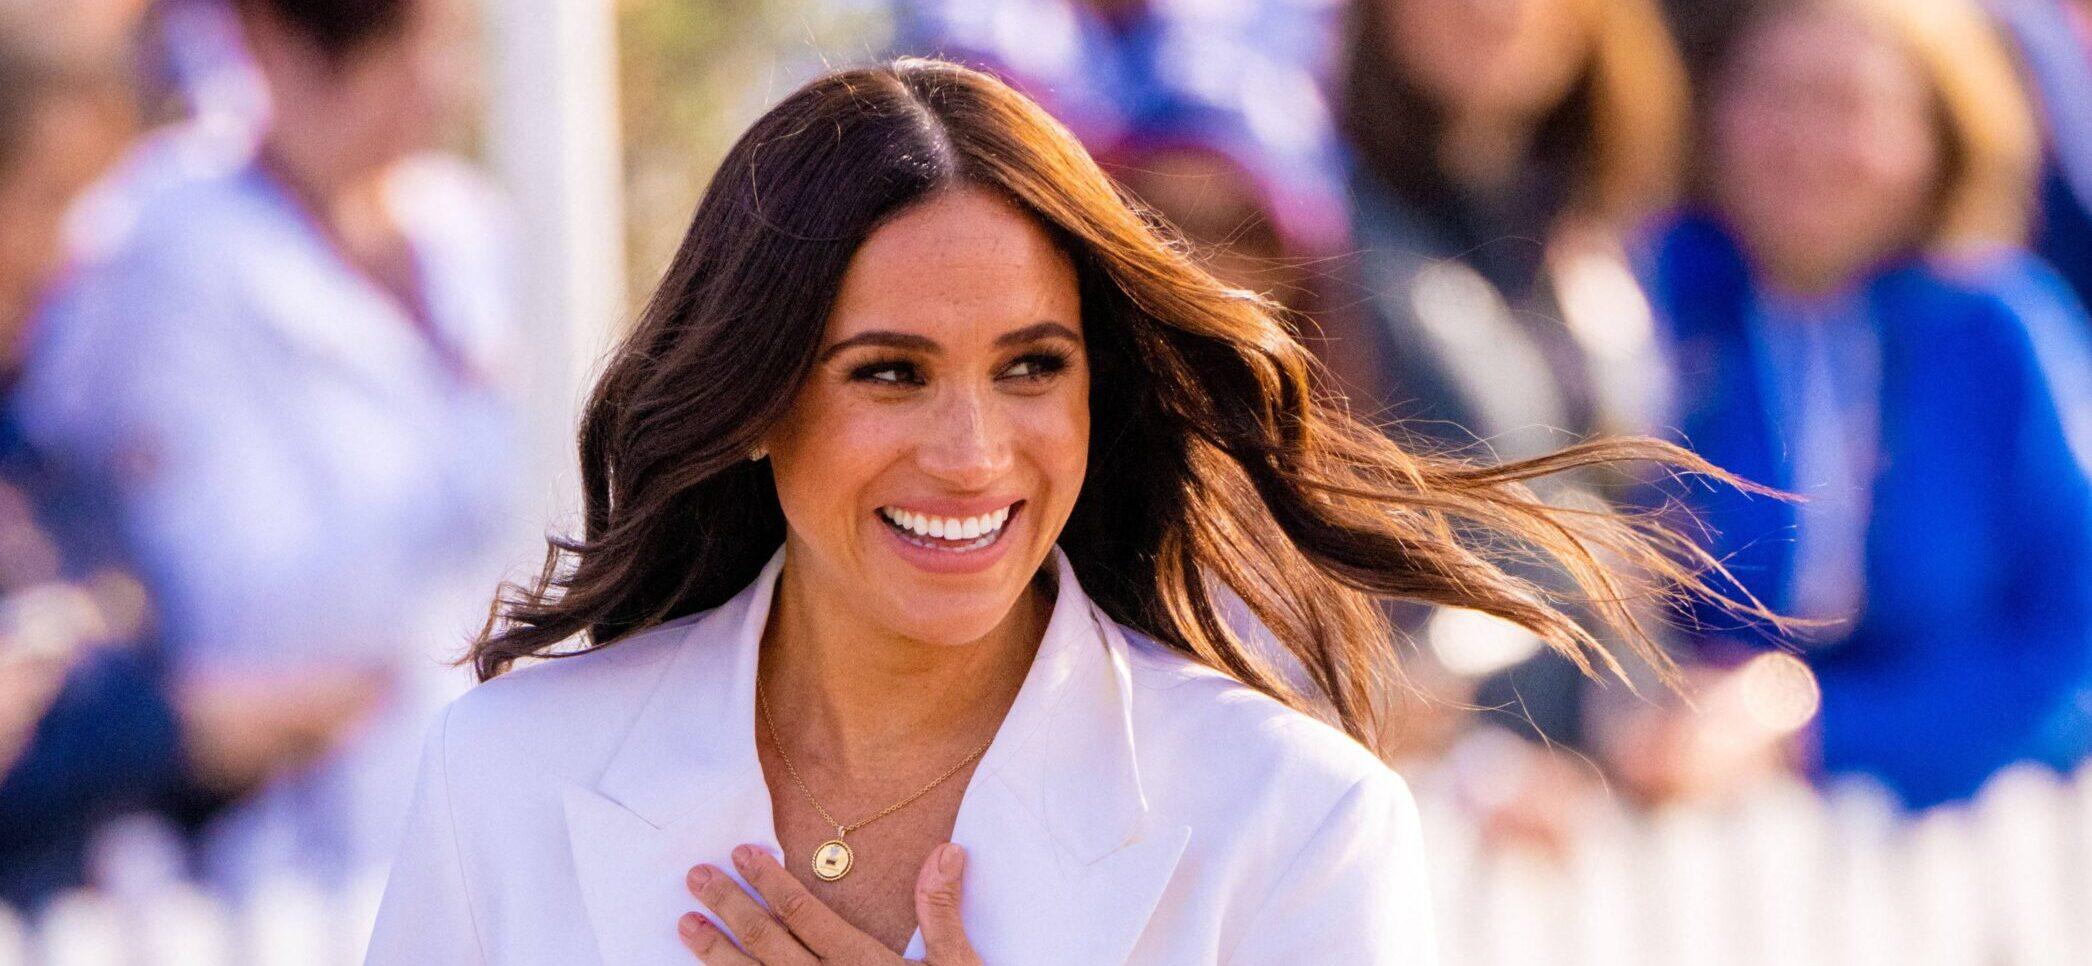 Meghan Markle Is ‘Focusing’ On Building Her Brand In The US As Popularity In The UK Plunges